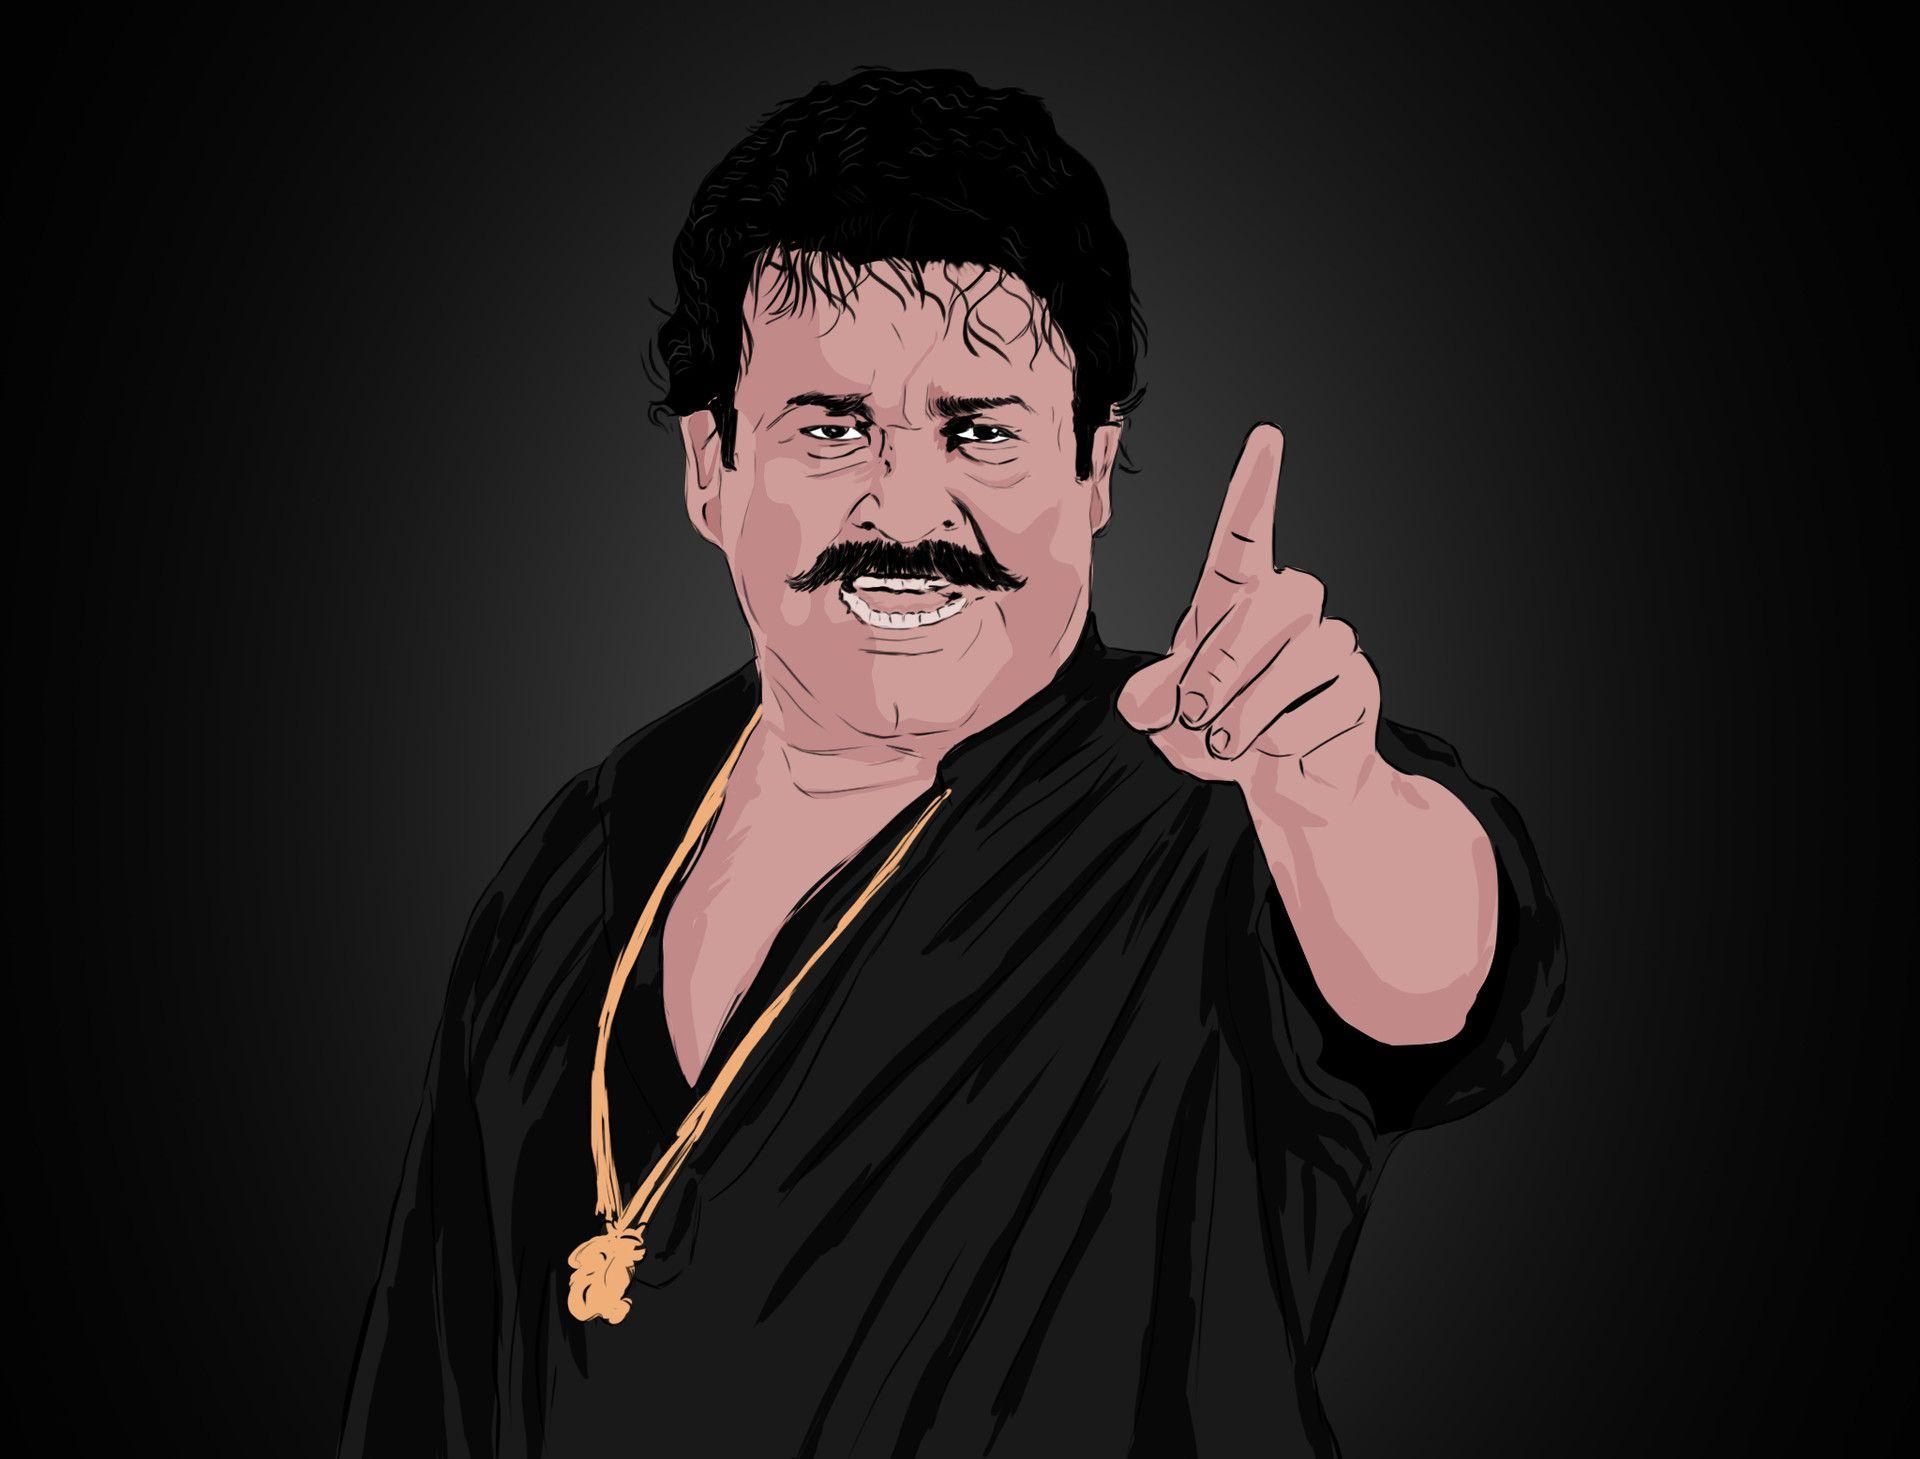 commissioned illustrations for MOHANLAL malayalam movie